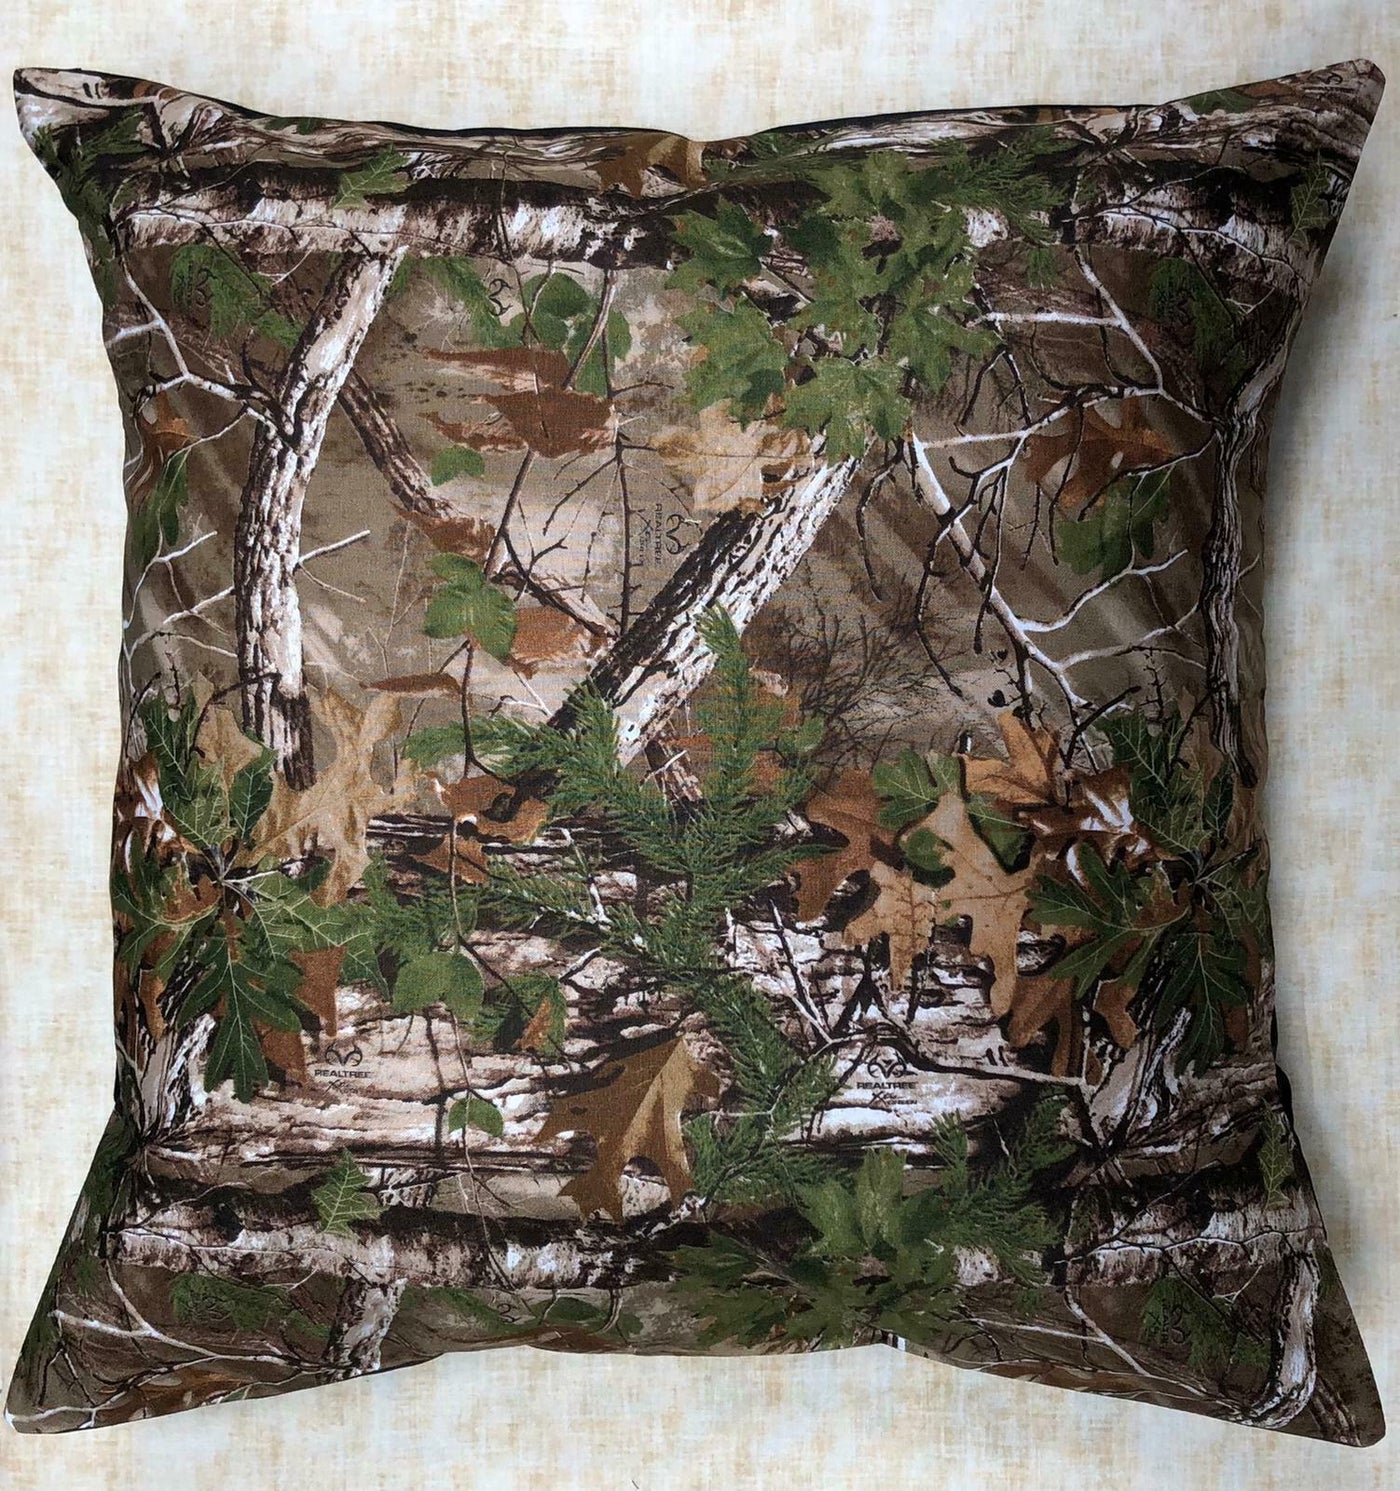 Real Tree Xtra Forest Camo Designer Cushion Cover Case fits 18" x 18" Cotton